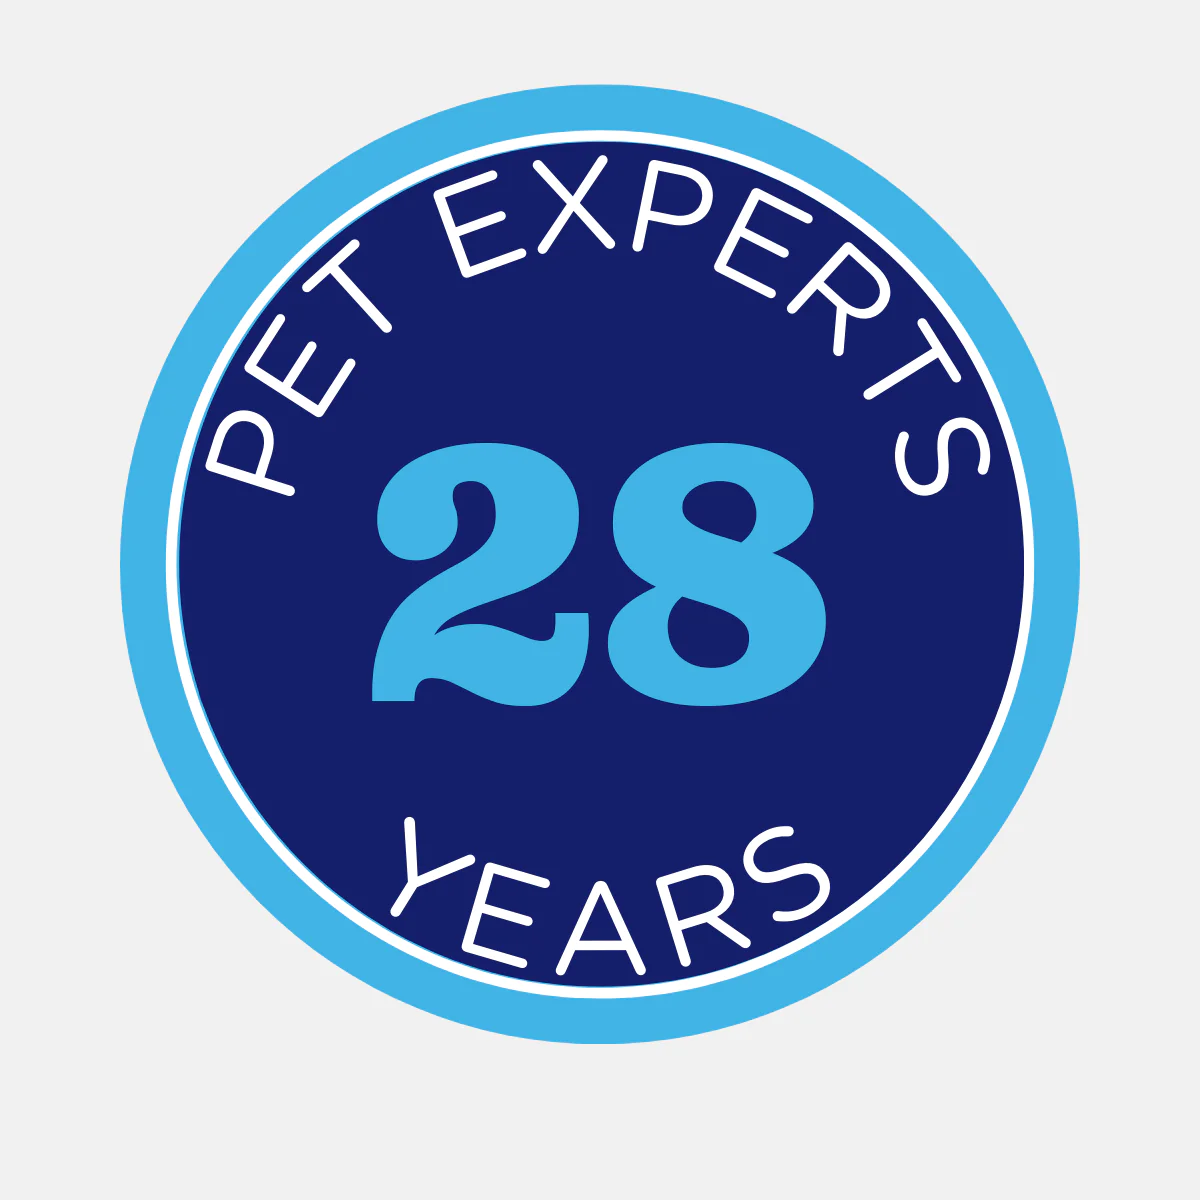 Grass Valley Pet Experts 27 Years.